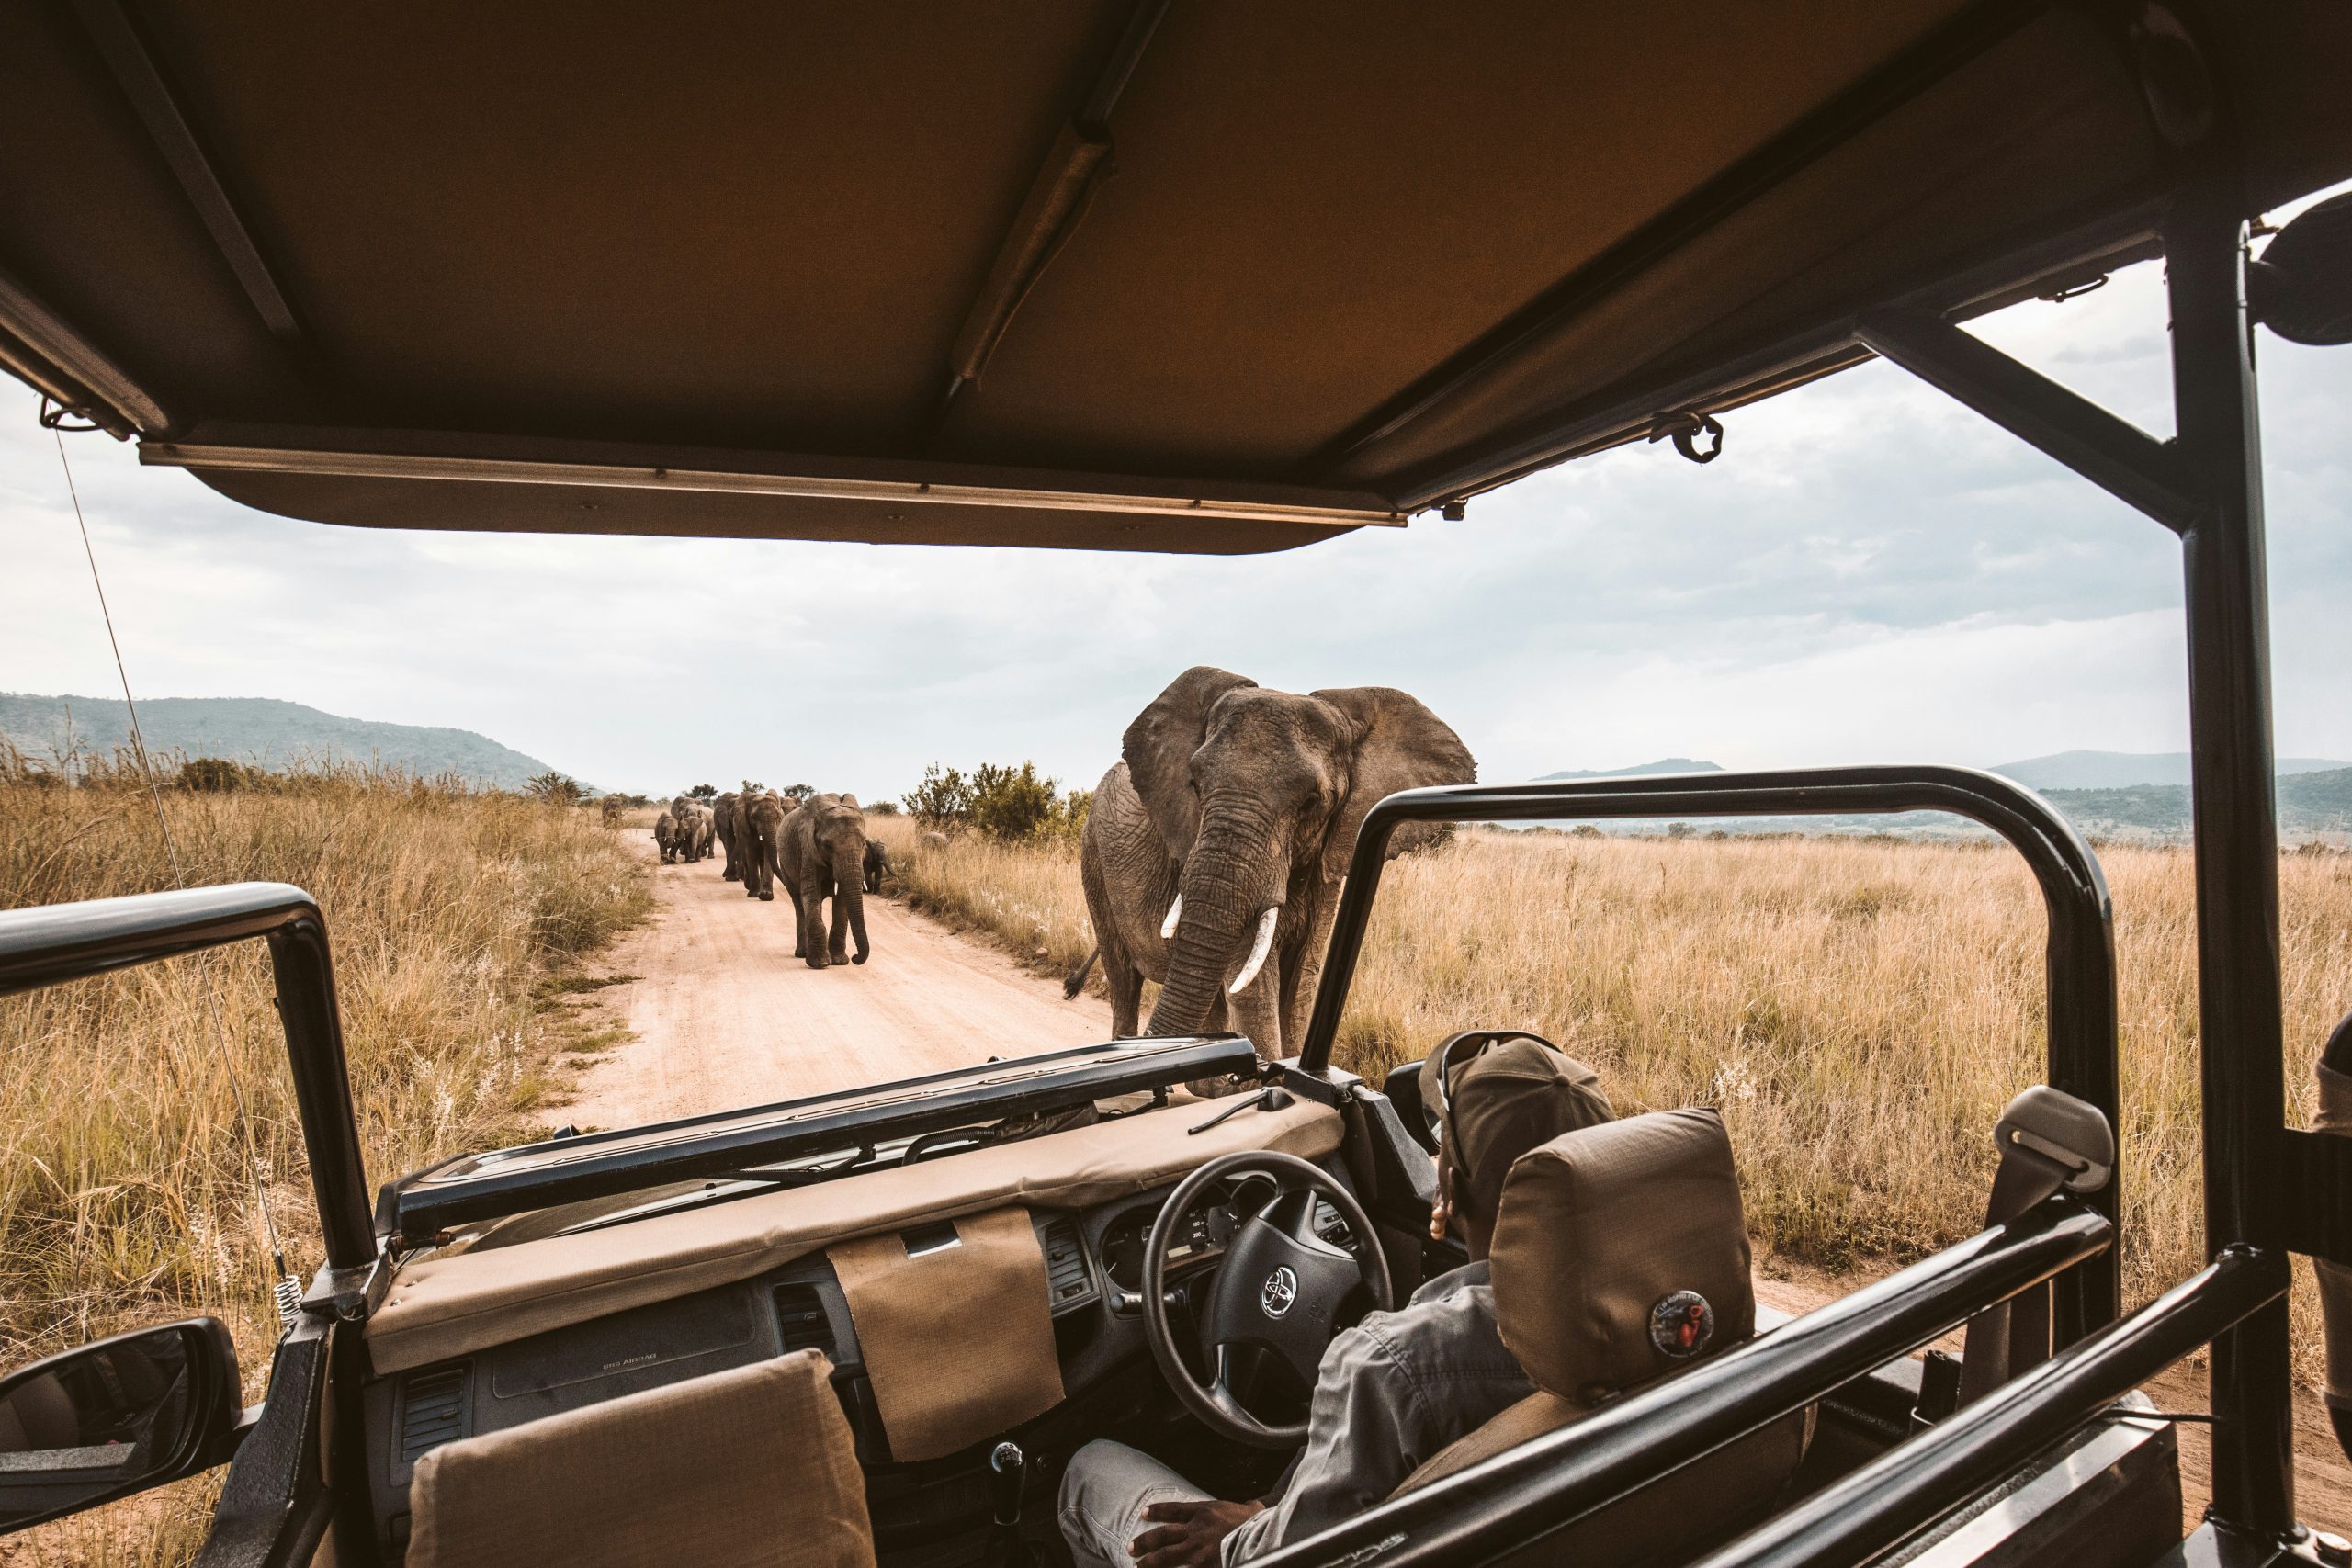 explore the wild beauty of africa with an unforgettable safari adventure. witness majestic wildlife and breathtaking landscapes on a safari experience like no other.